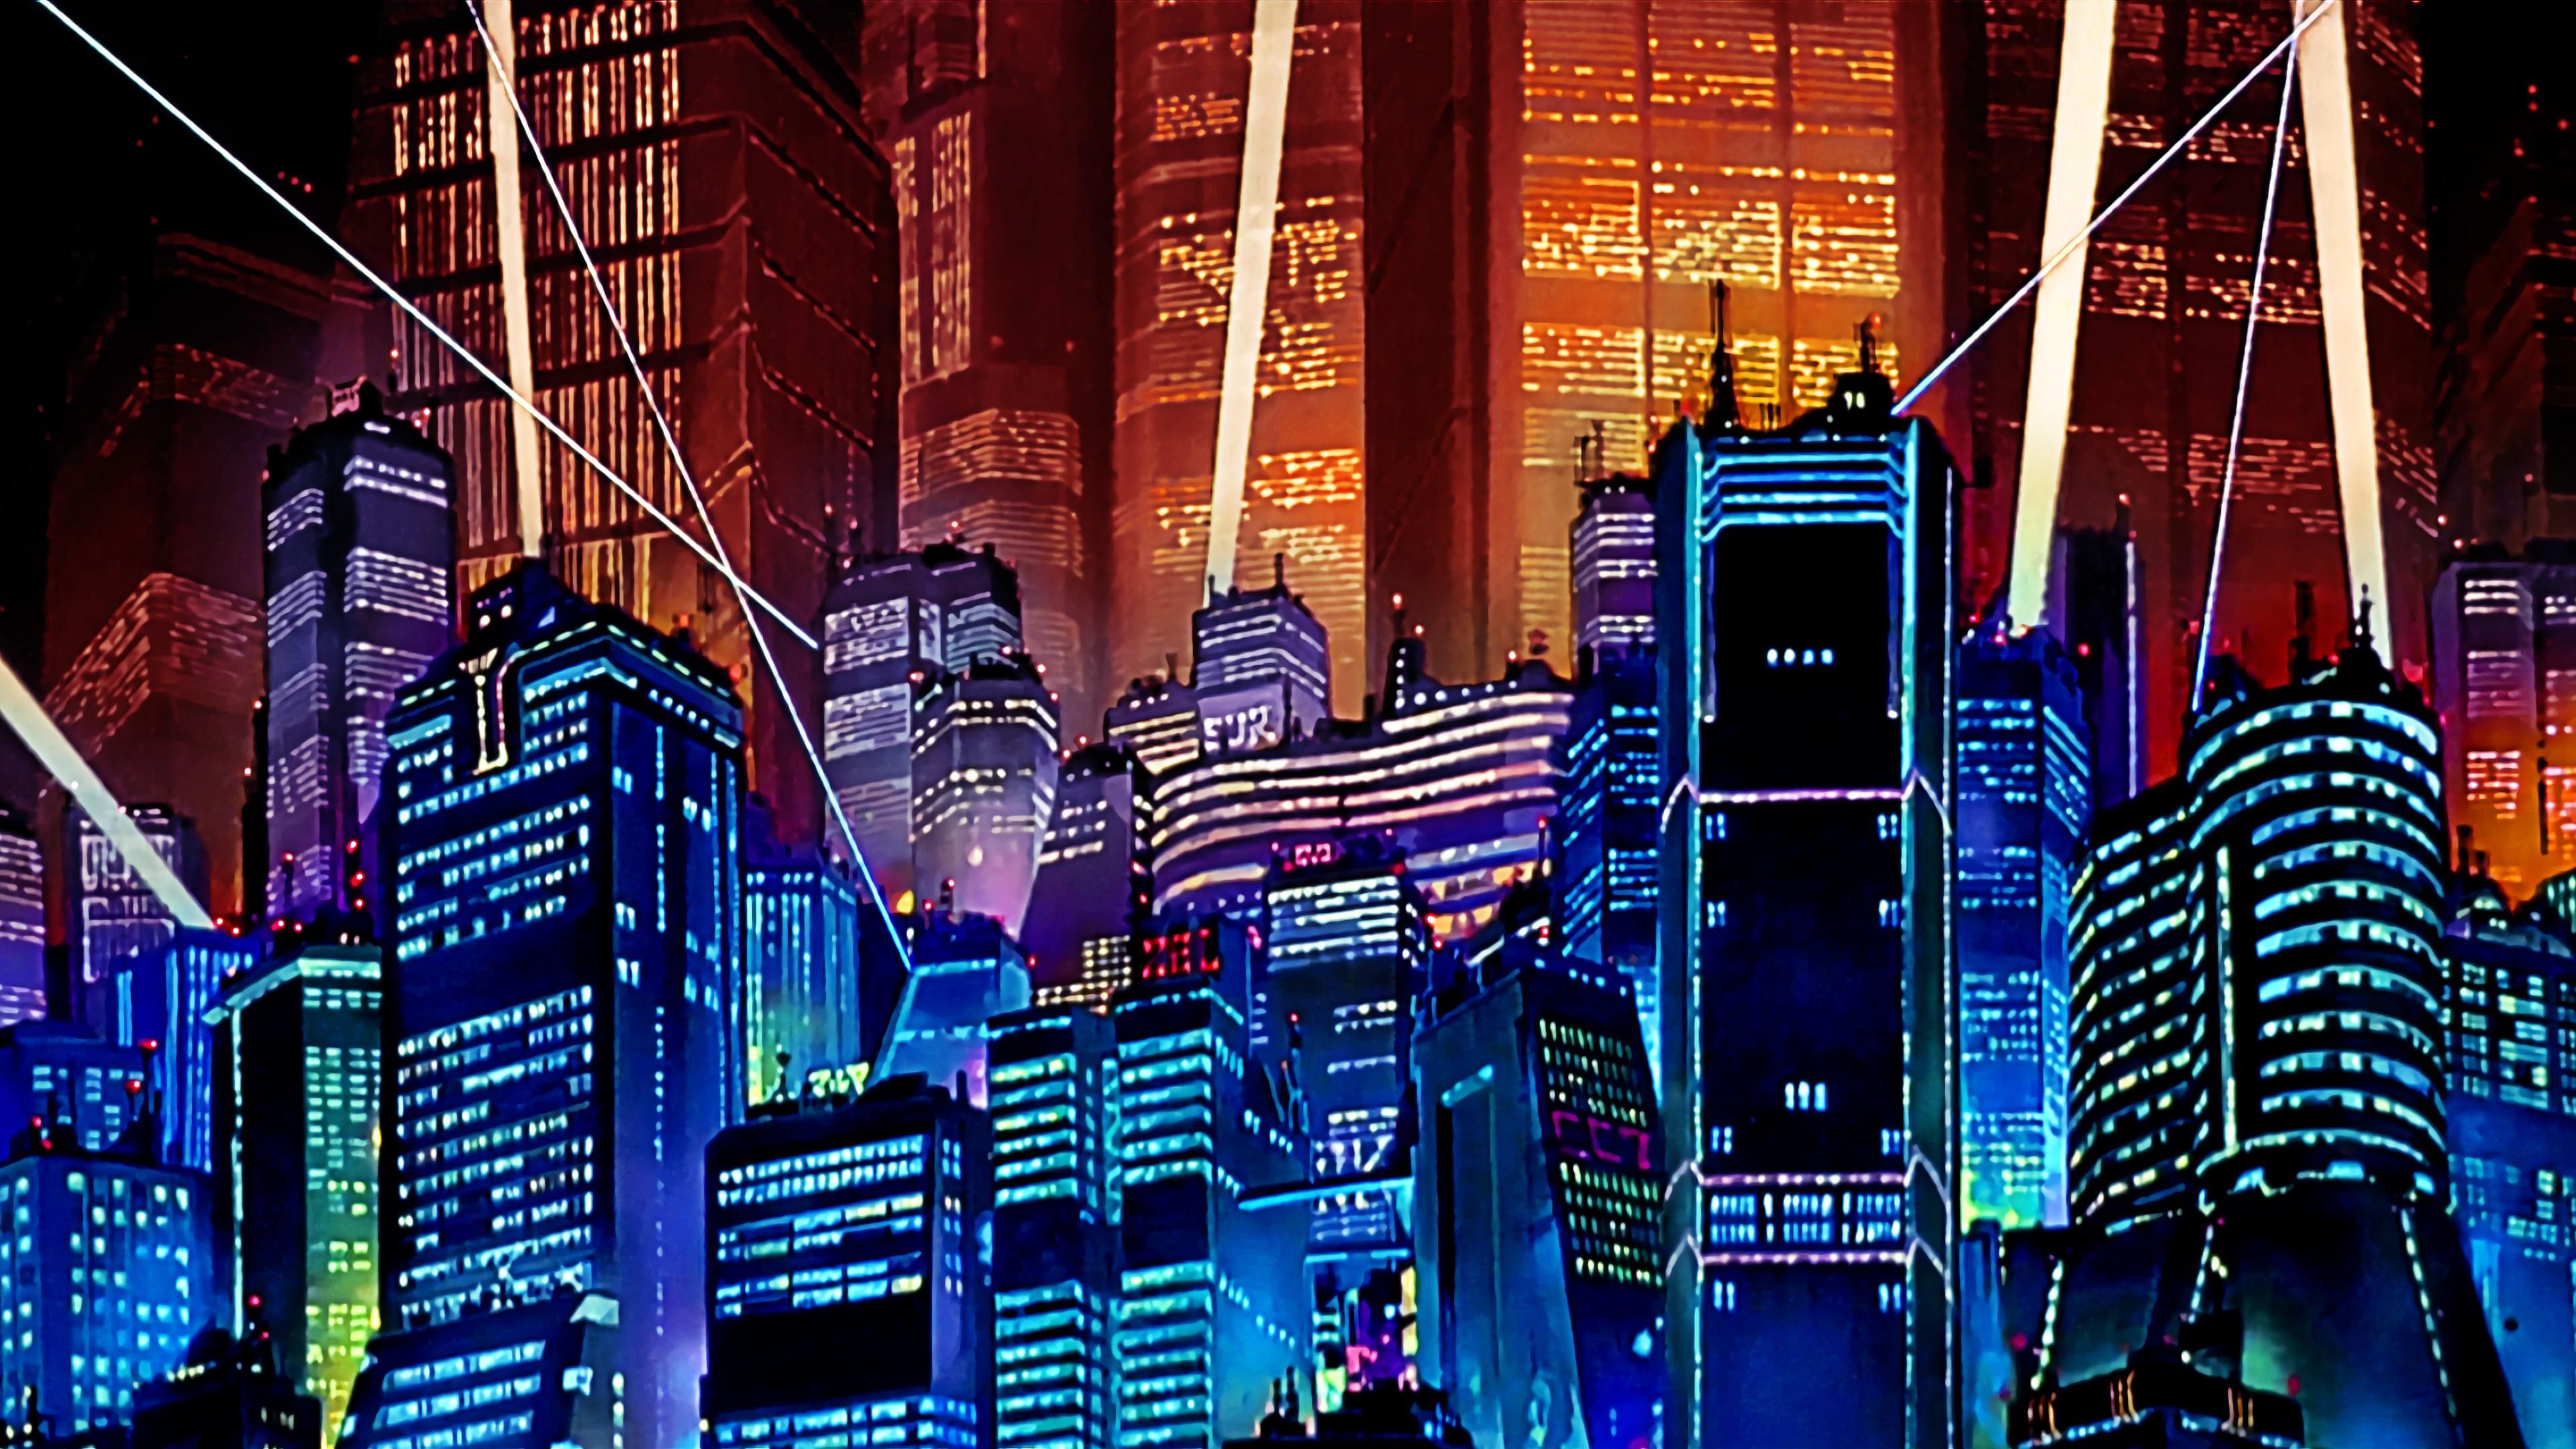 Akira Neo Tokyo Wallpaper Collection Enhanced and Radified). Neo